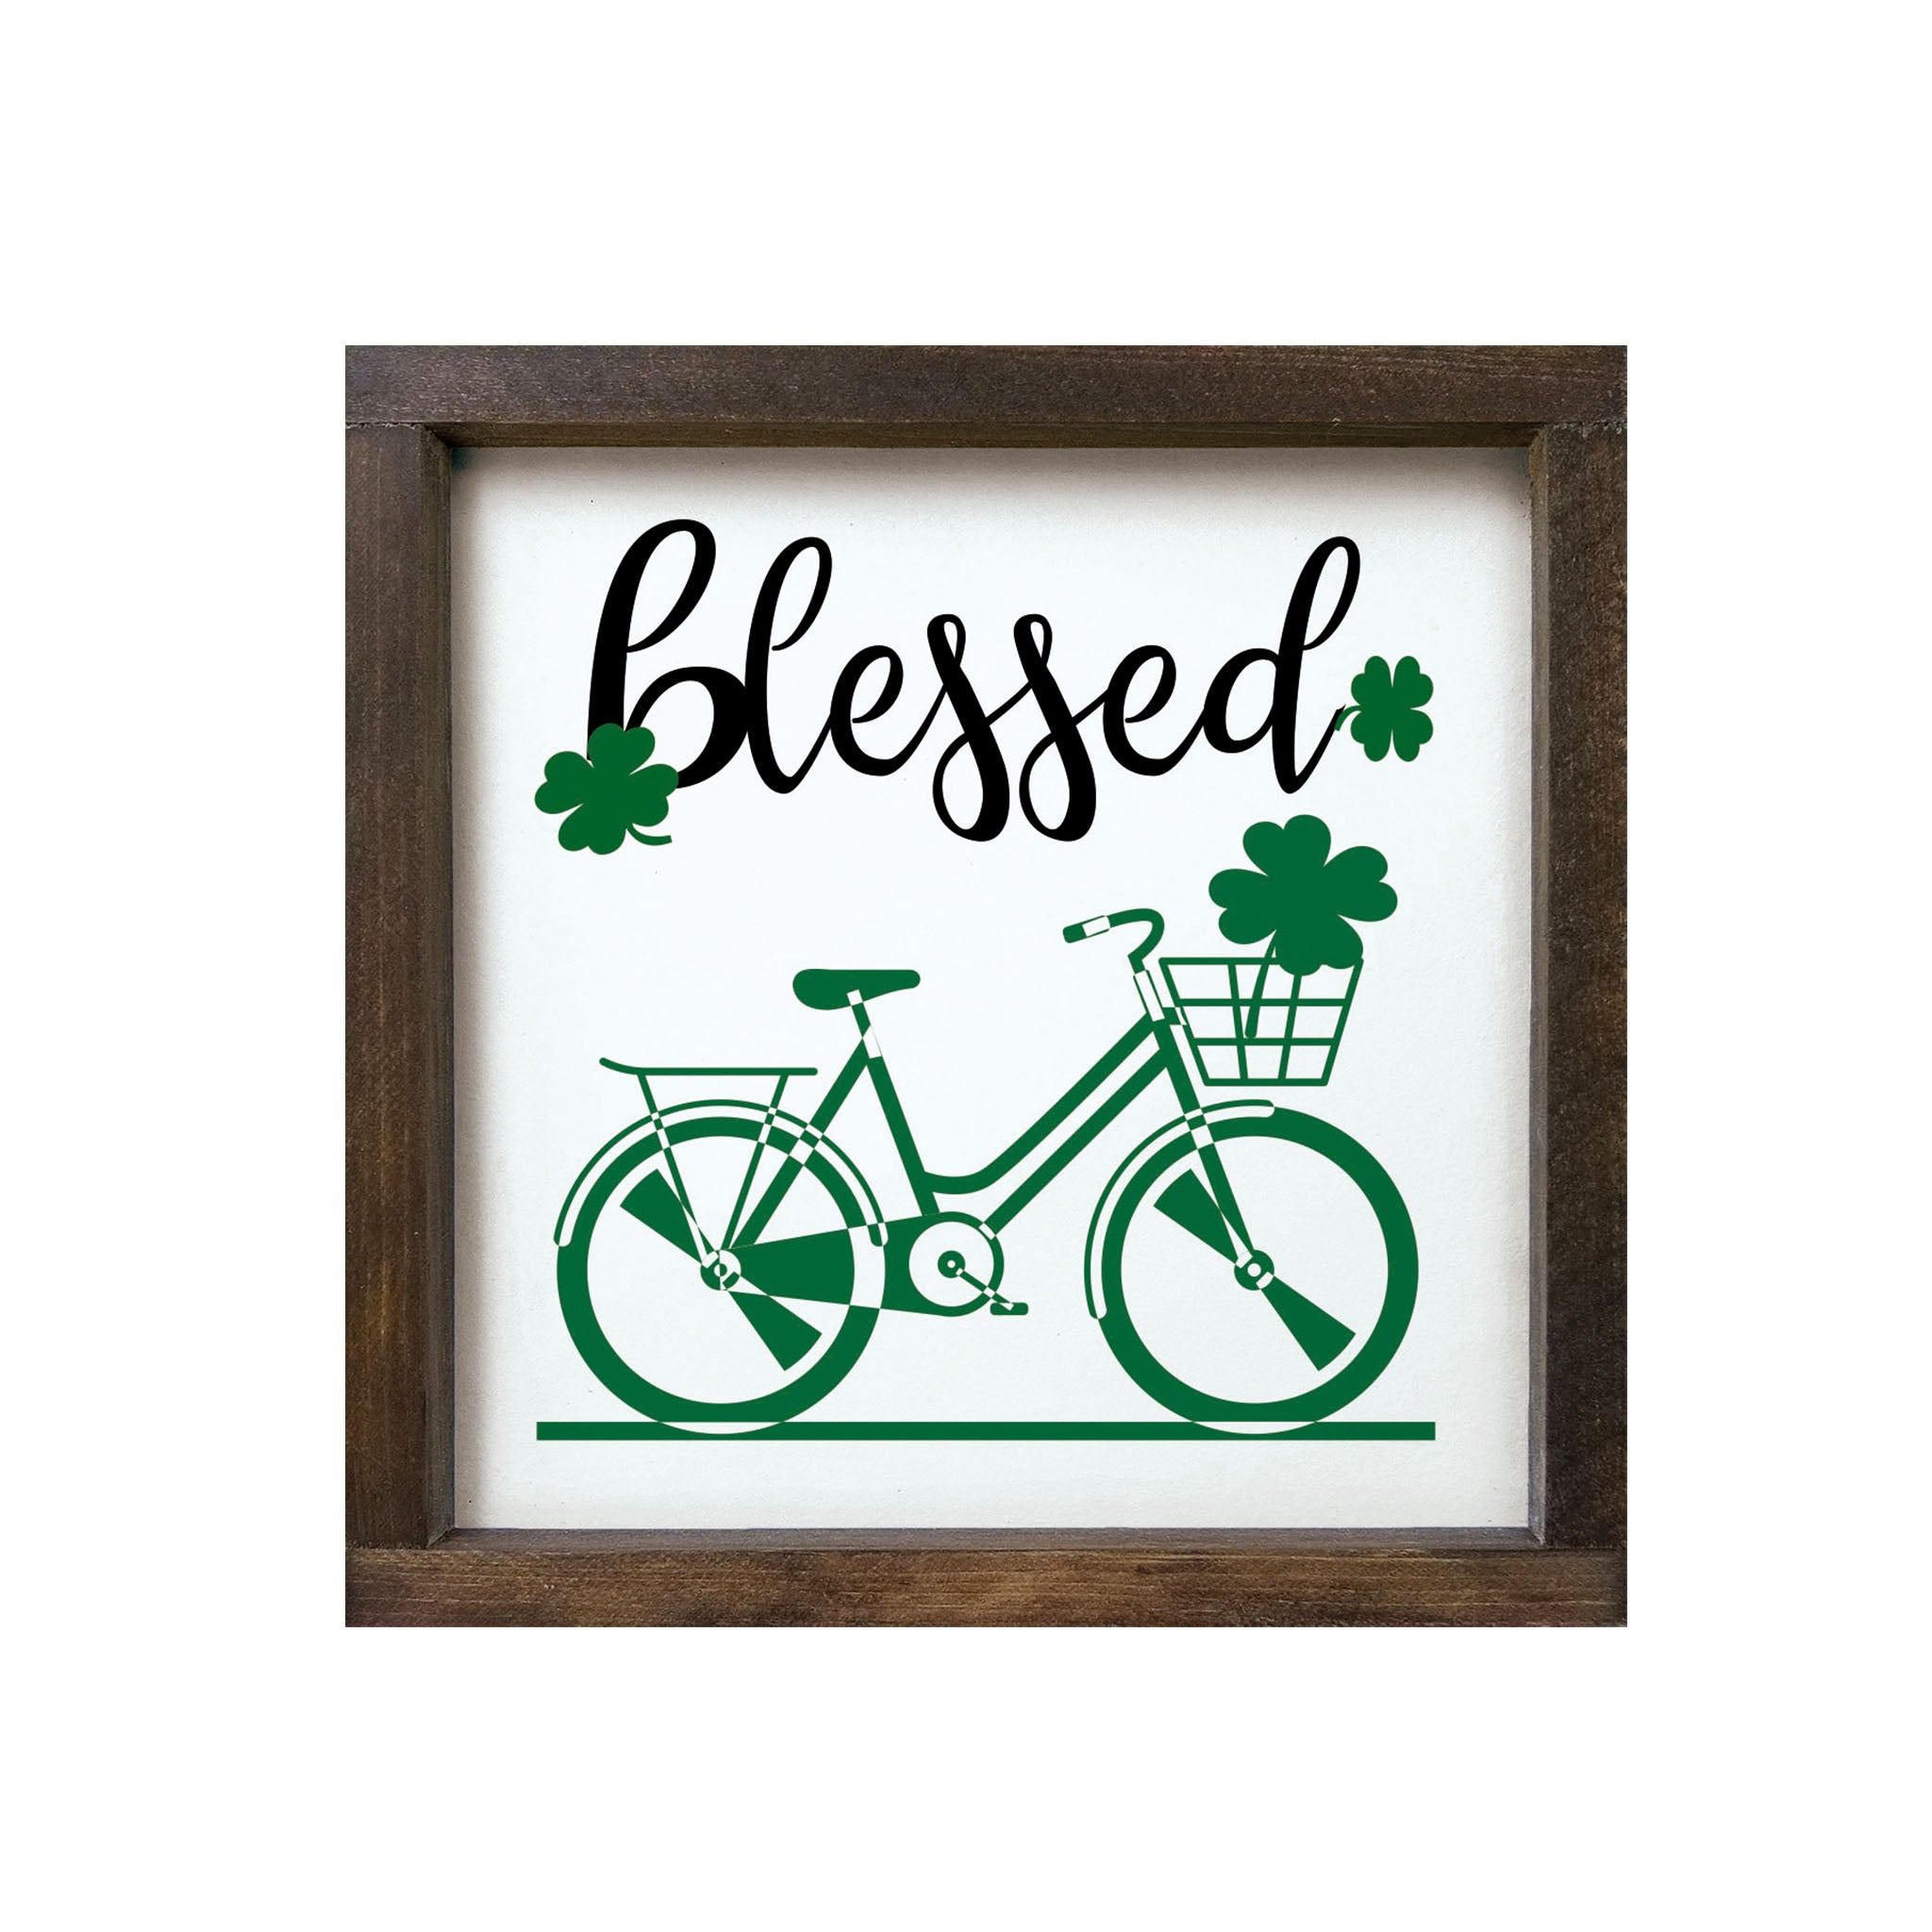 St Patrick's Day Wood Sign - Blessed_Clover Bicycle - 12